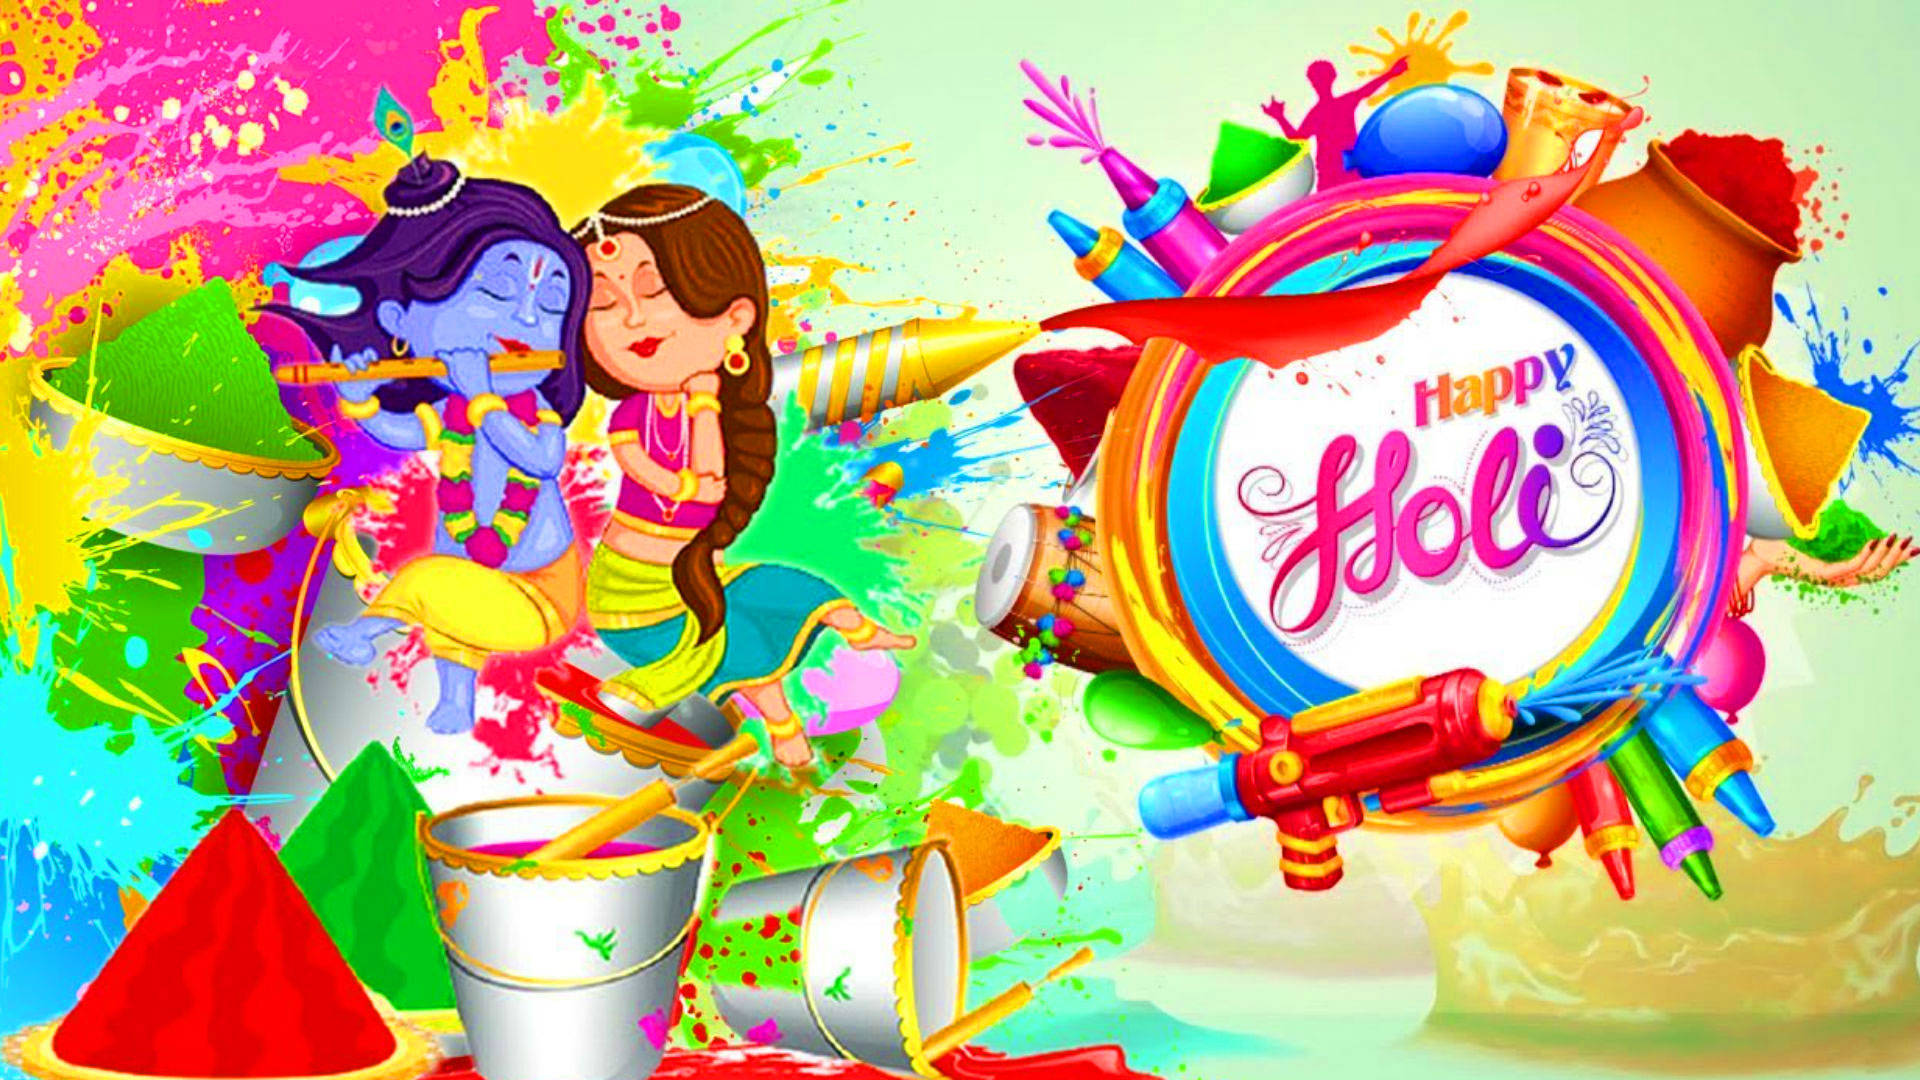 Celebrate The Festival Of Colors With Vibrancy - Happy Holi Hd Background